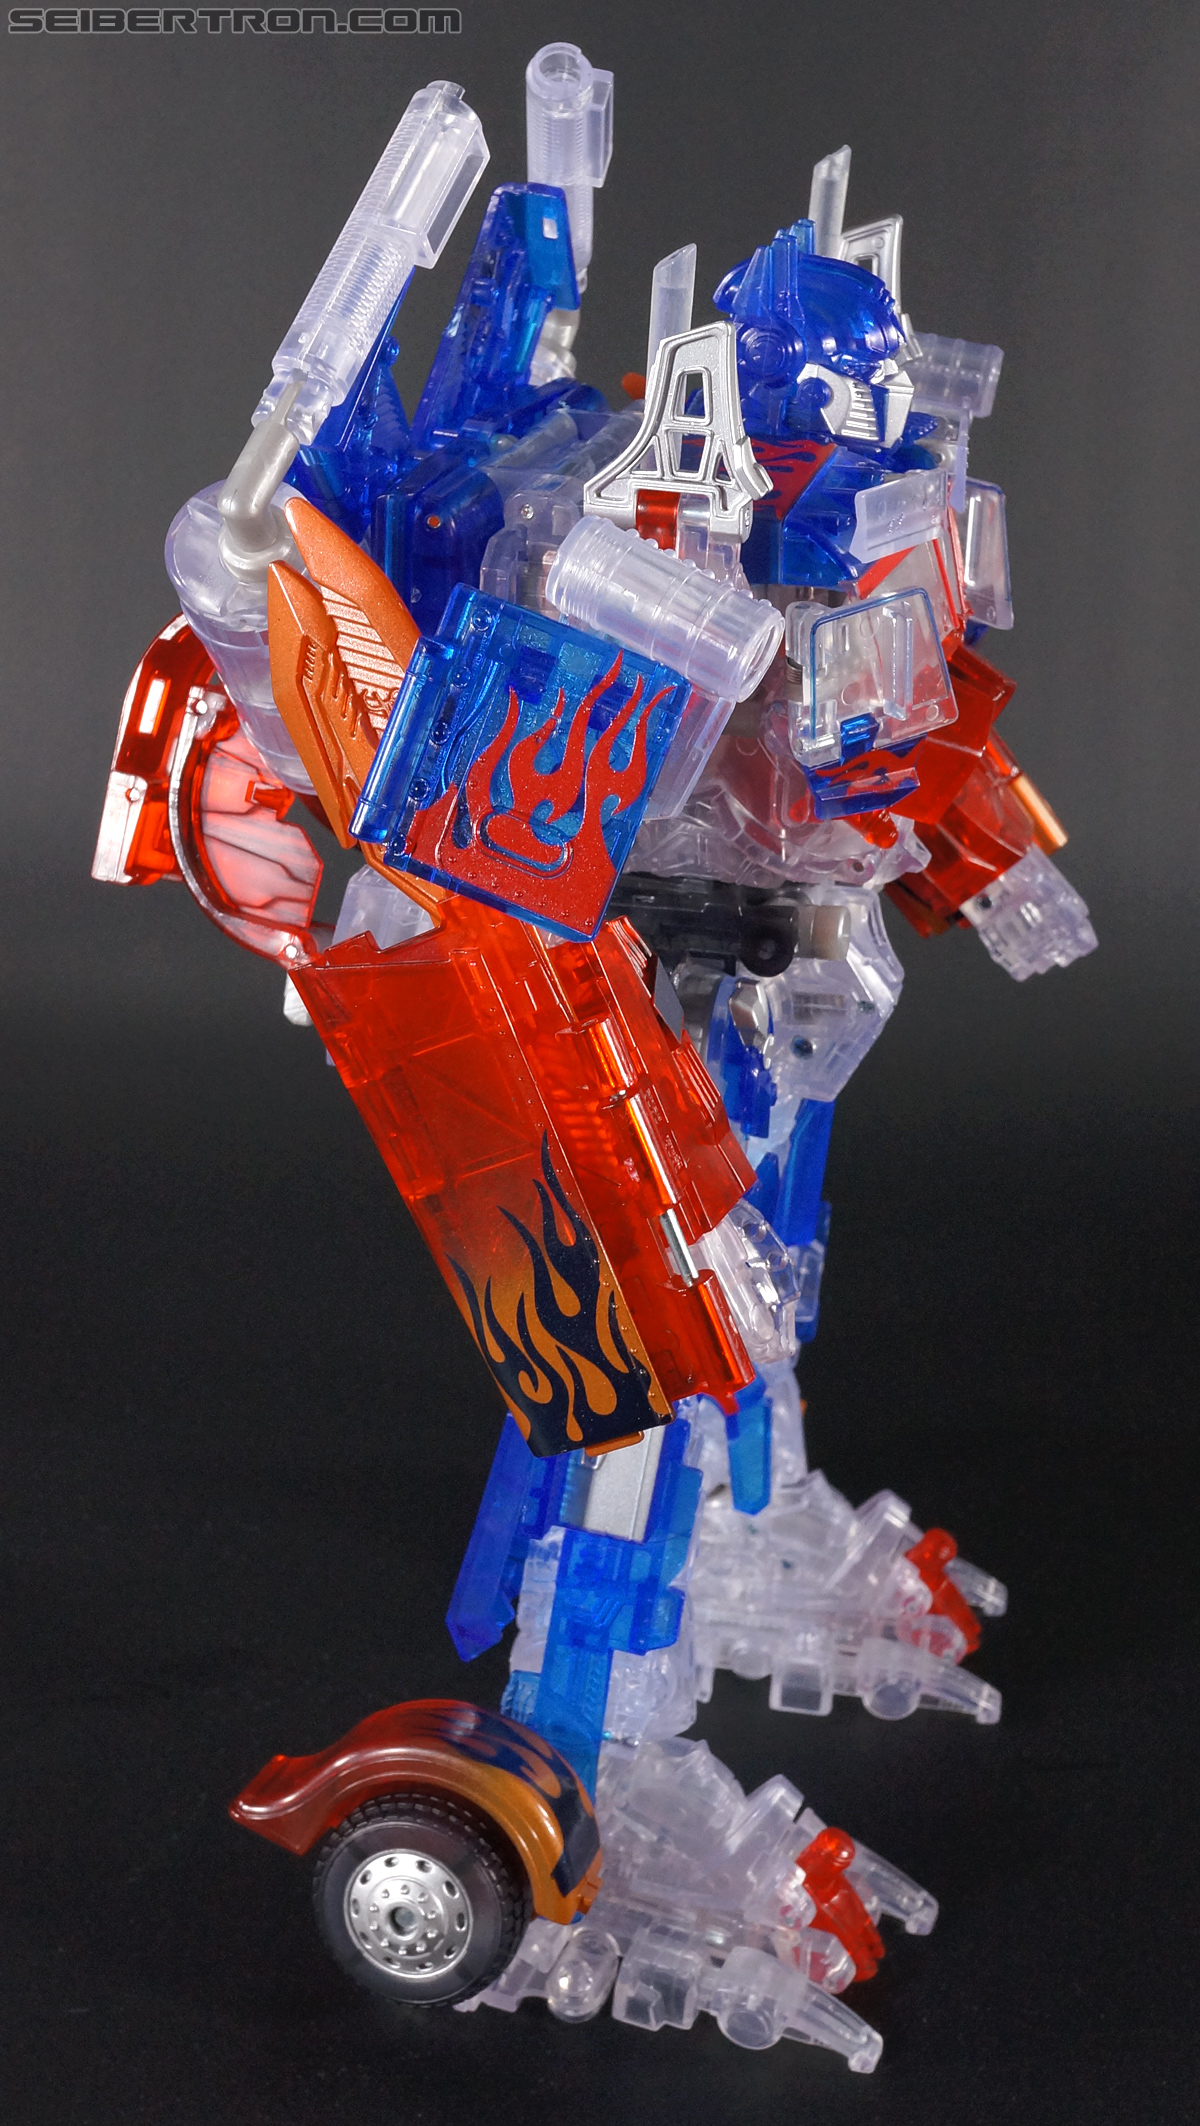 Transformers Revenge of the Fallen Optimus Prime Limited Clear Color Edition (Image #51 of 125)